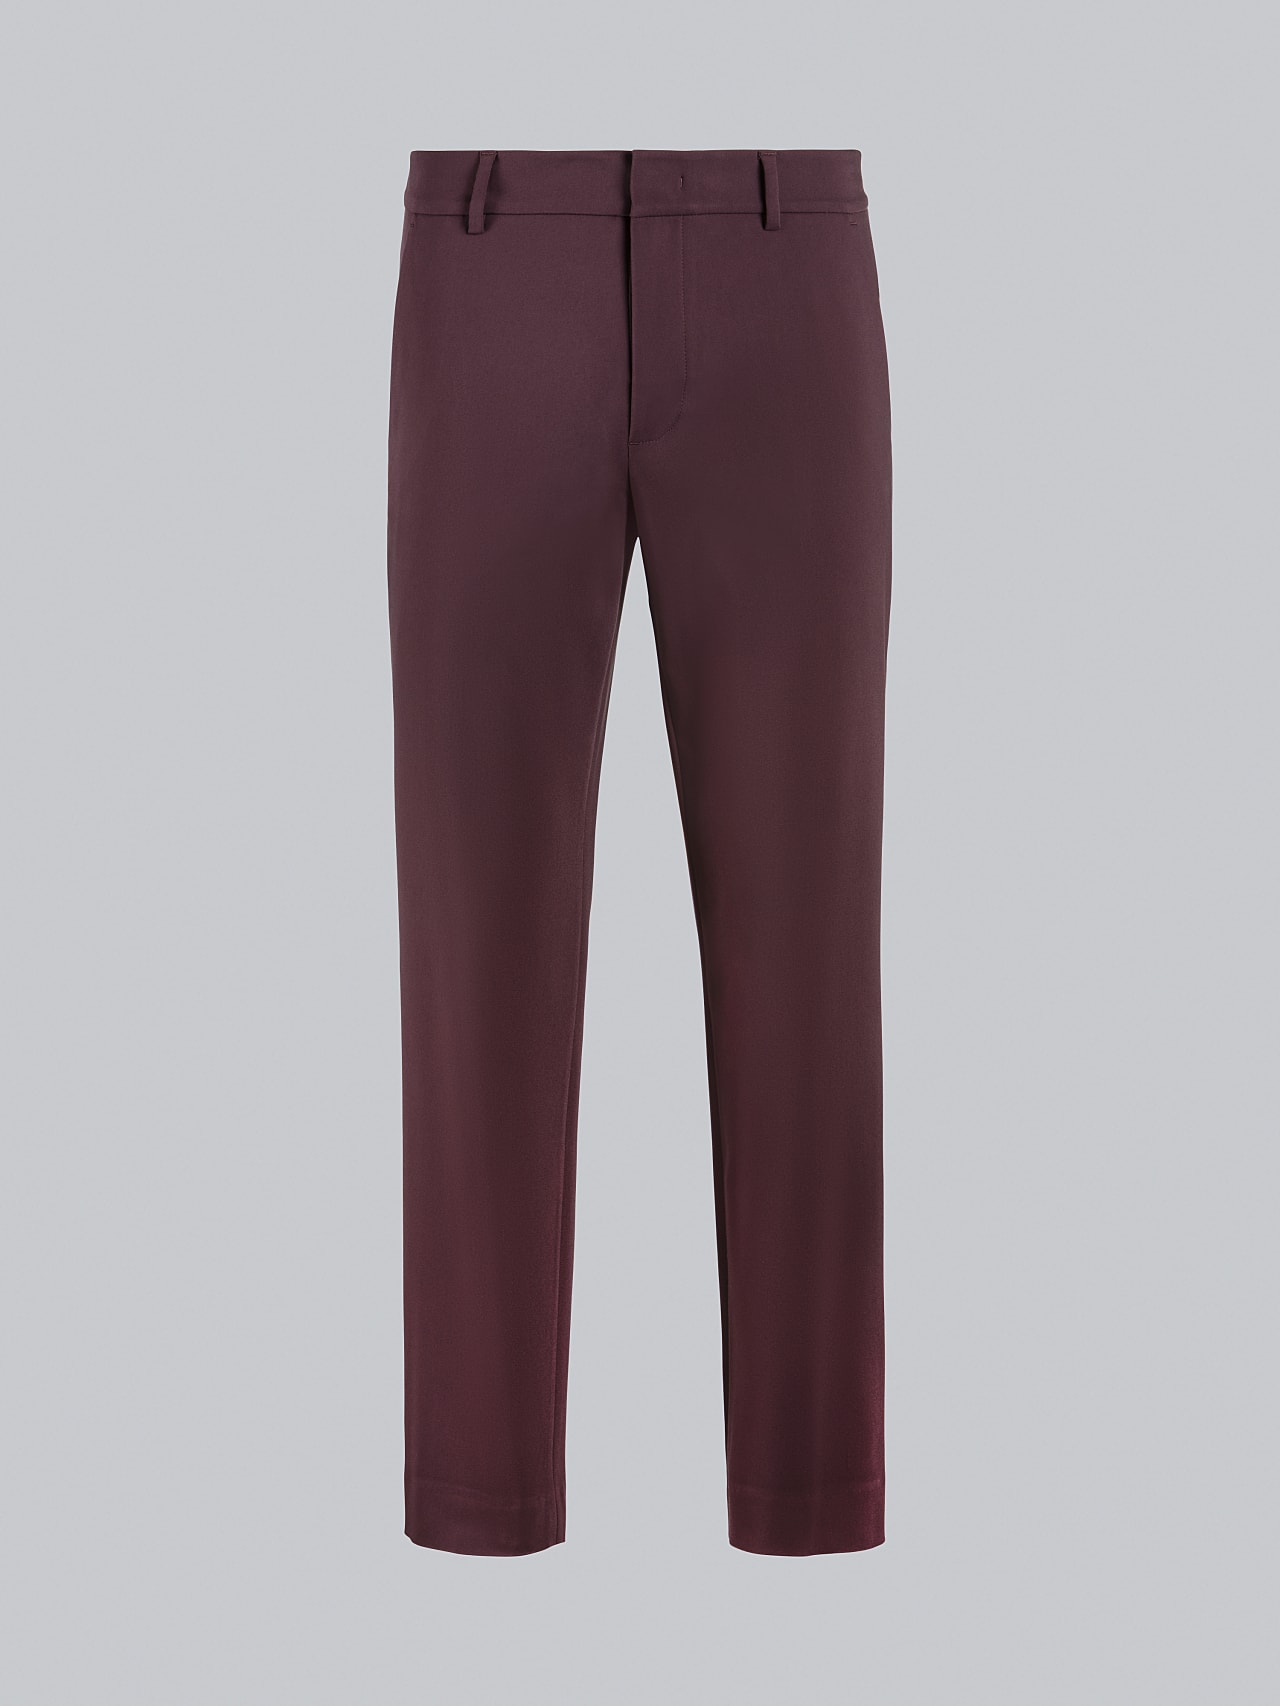 AlphaTauri | PELAN V1.Y5.02 | Tapered Pants with Pleats in Burgundy for Men